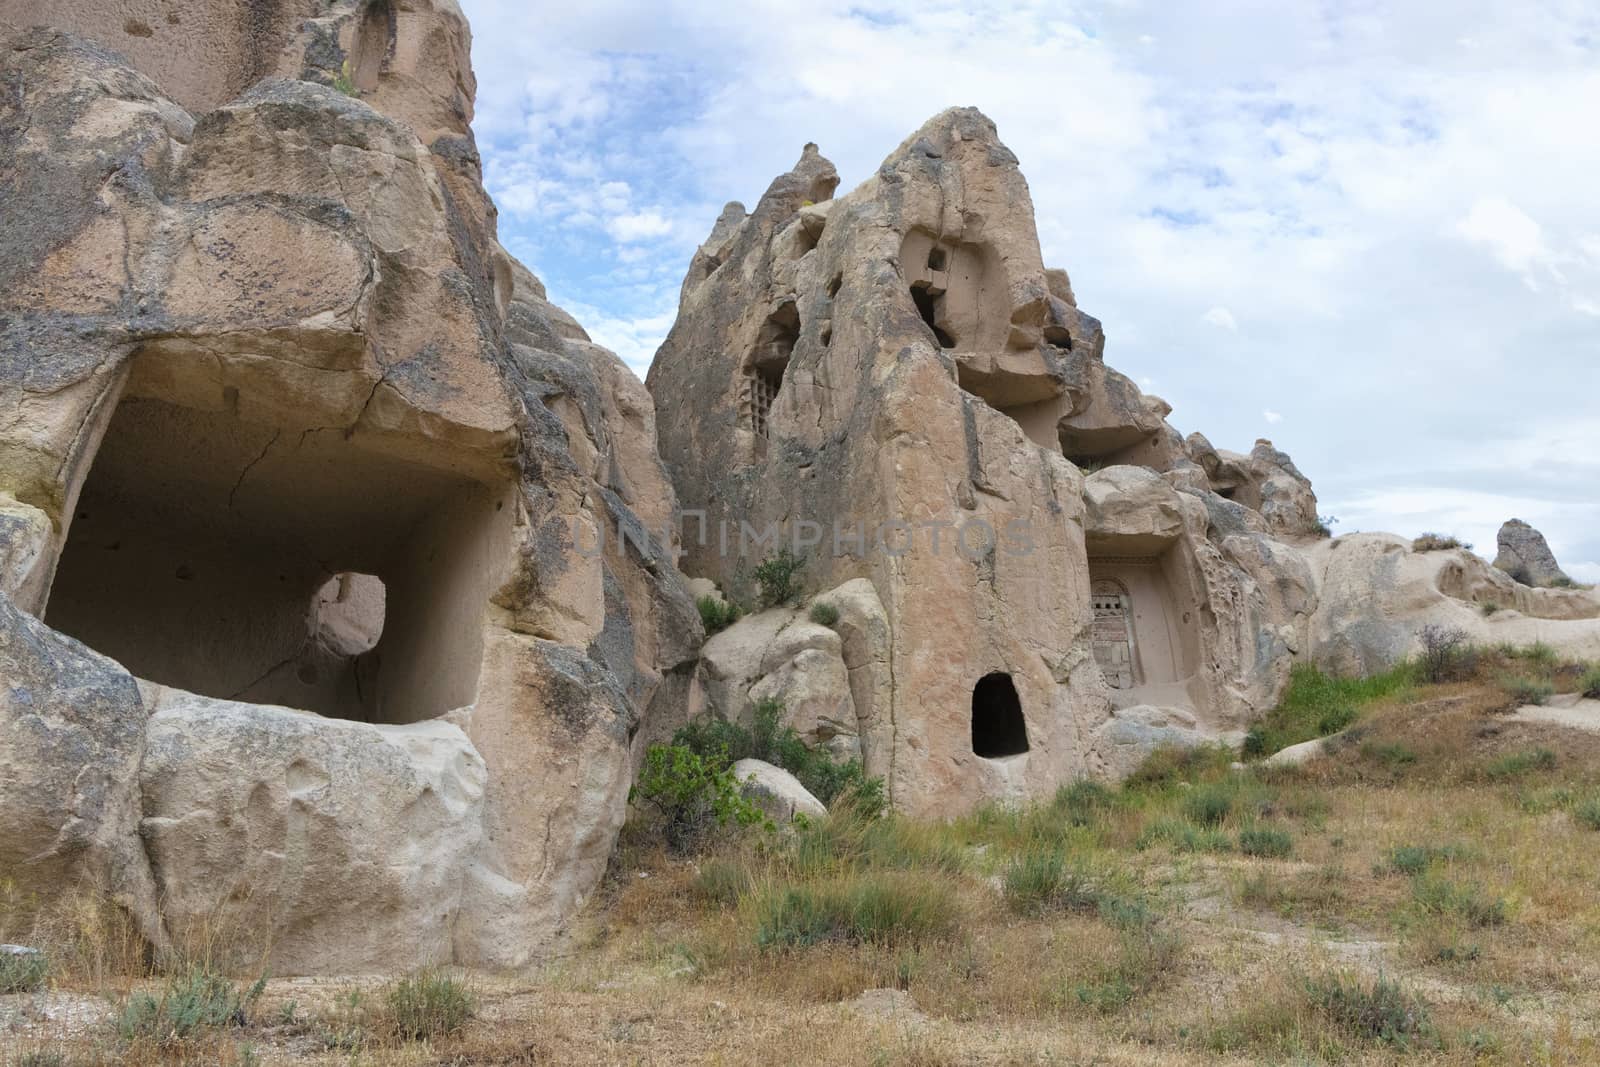 Ancient caves in a mountain landscape in the valleys of Cappadocia against the bright blue and cloudy spring sky of central Turkey